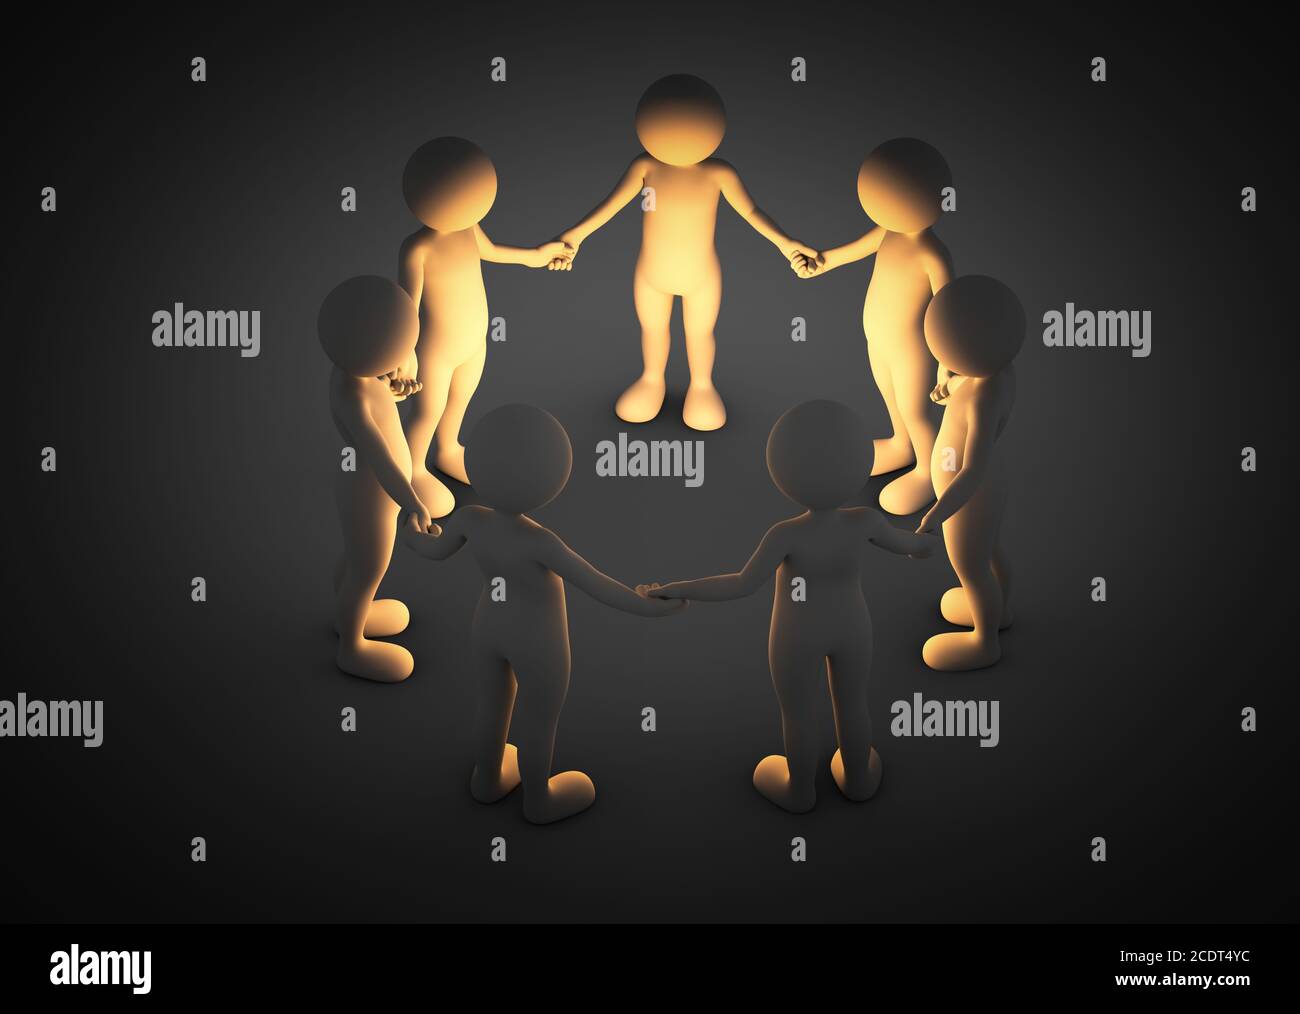 Toon men holding hands in a circle. Light shining. Brainstorm, teamwork, connection concept Stock Photo